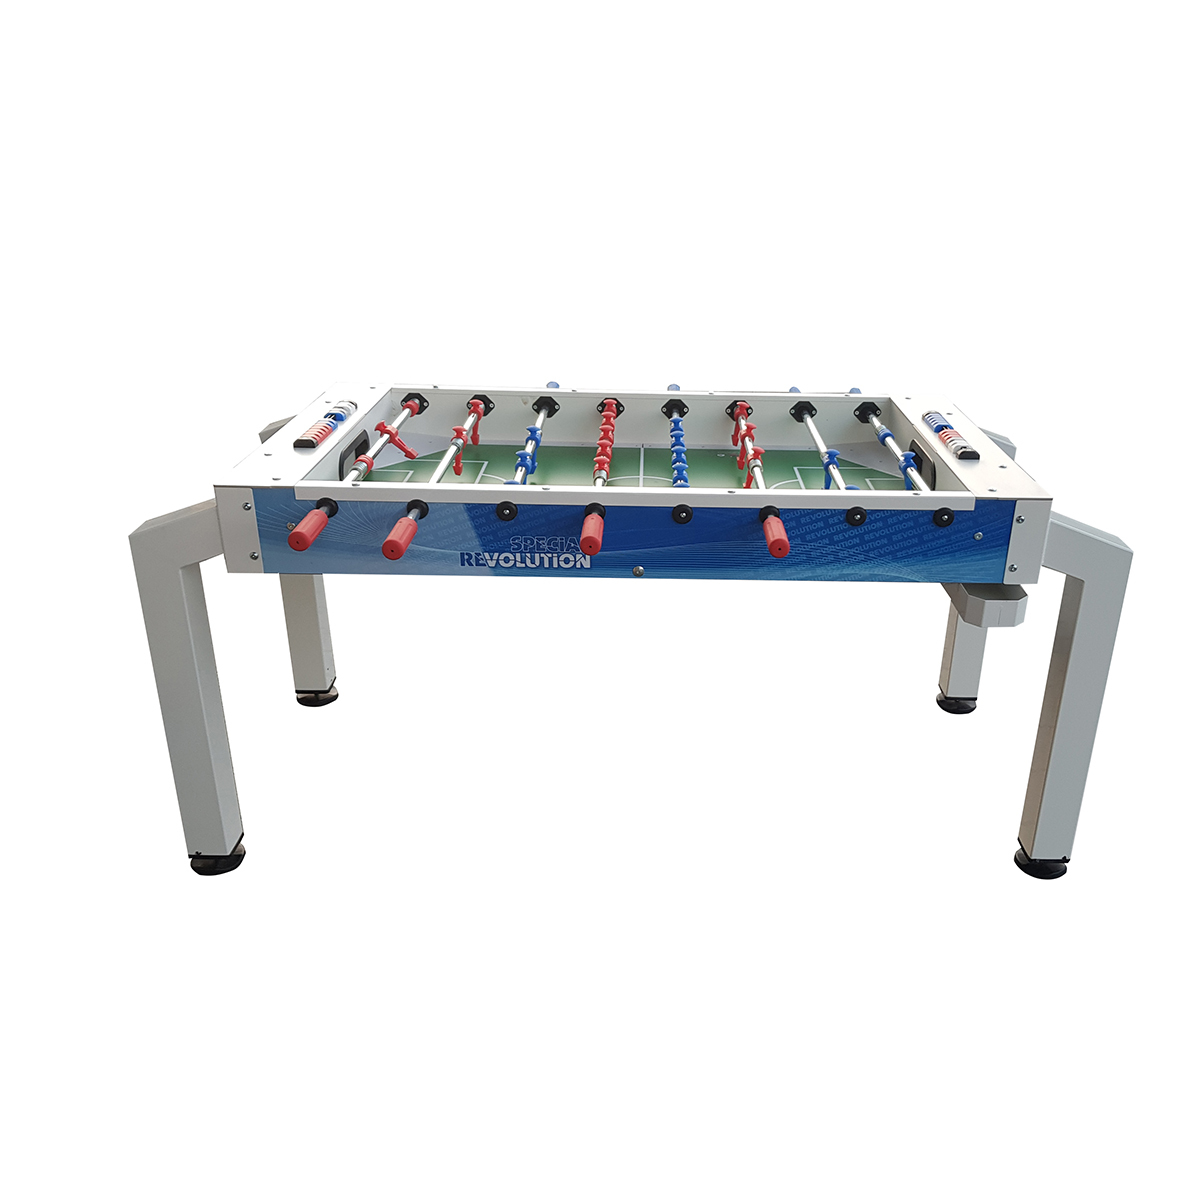 Roberto Sport 6ft Special Revolution Football Table Designed for Wheelchair Use